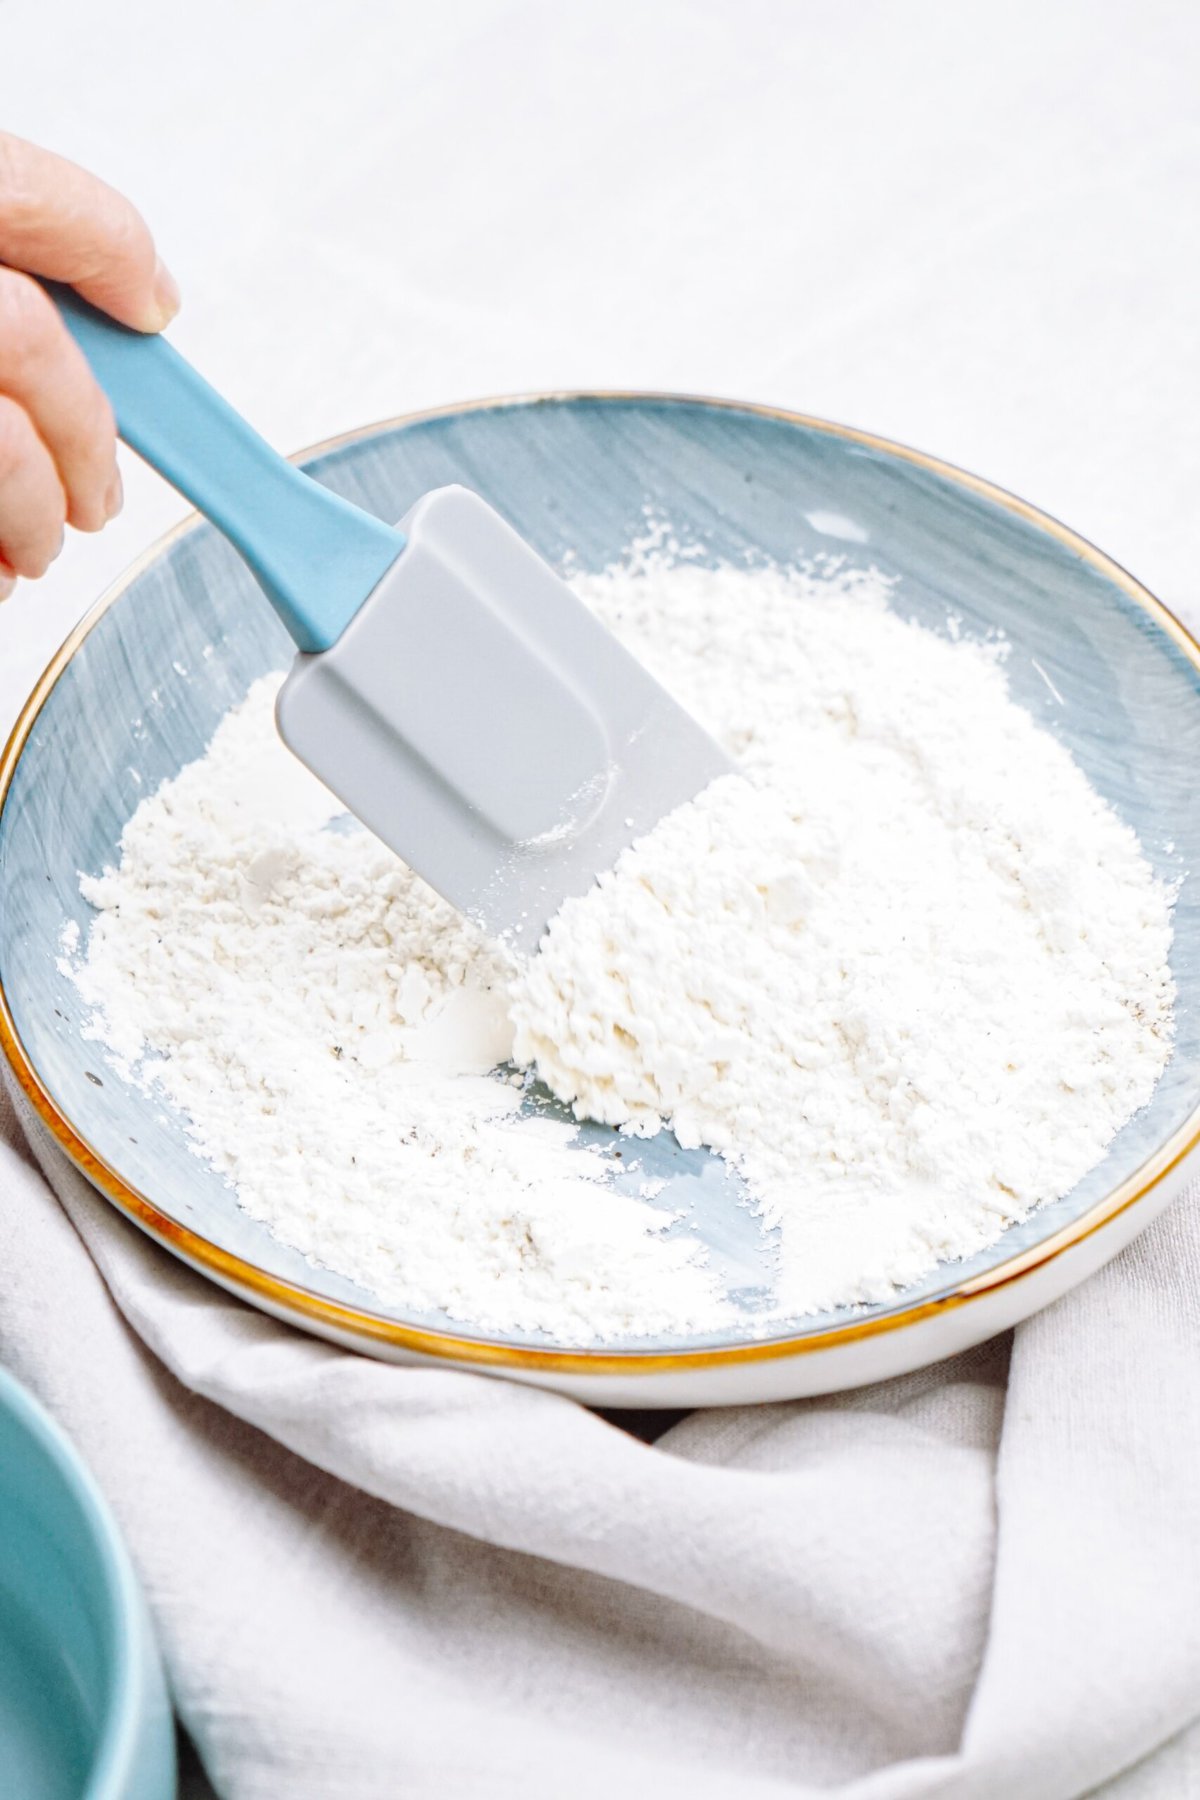 A person using a spatula to mix flour in a bowl.